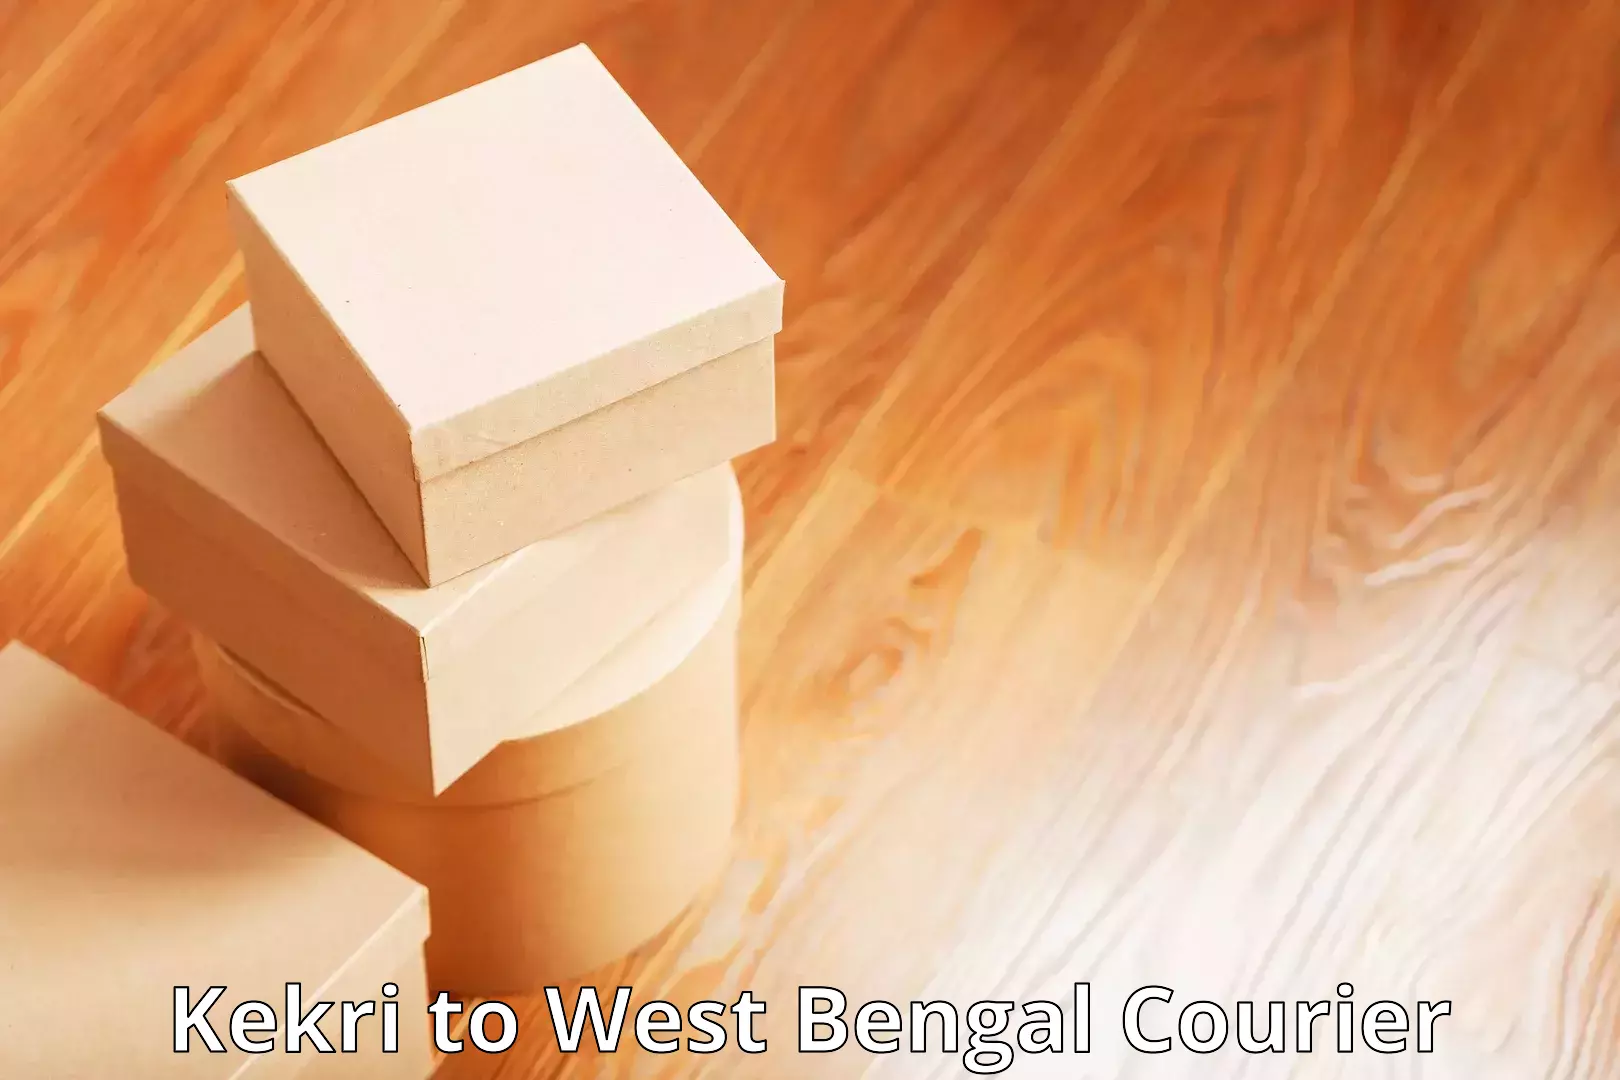 Courier service partnerships Kekri to West Bengal